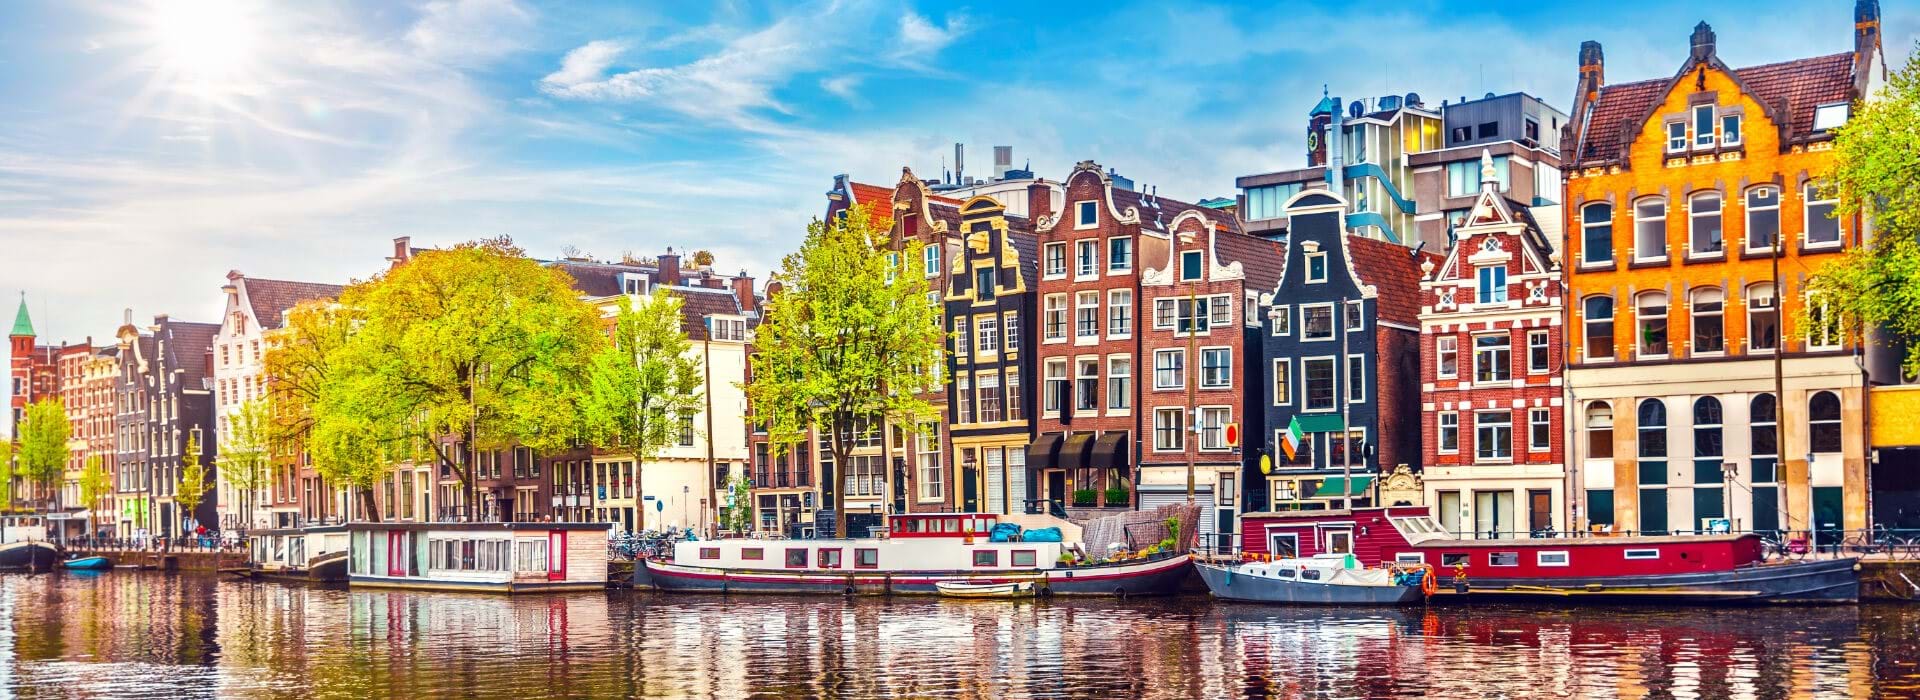 Amsterdam tours and holidays 2020 / 2021 | Newmarket Holidays